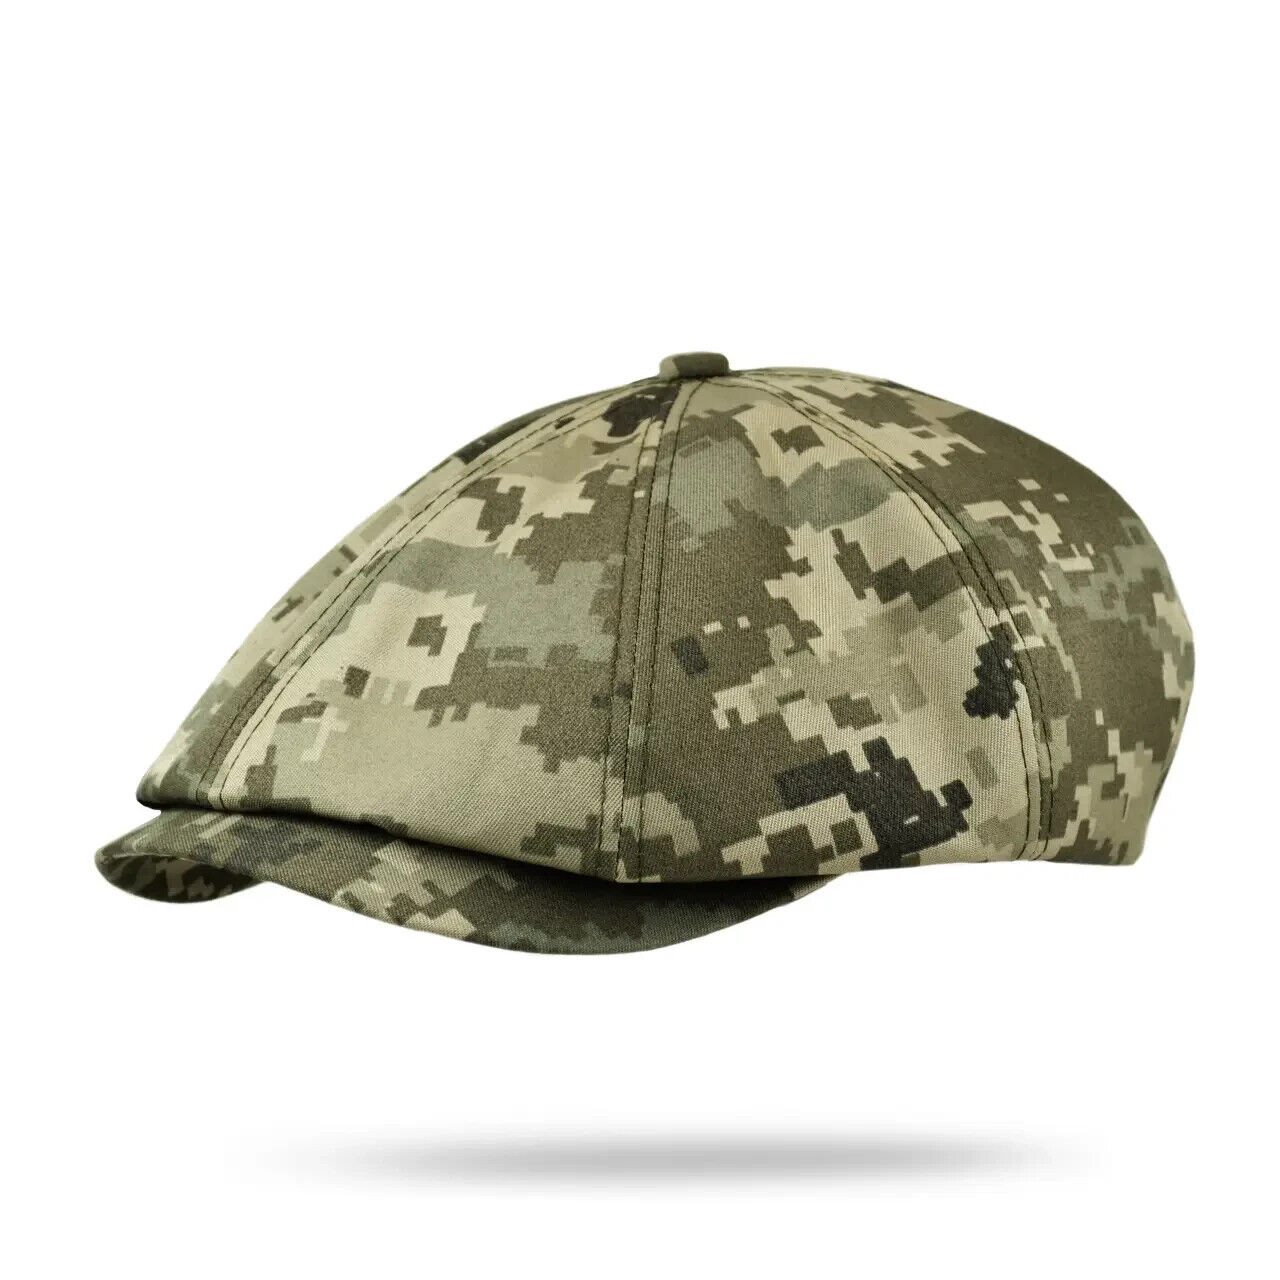 Eight blade pixel cap of the Armed Forces, of the Armed Forces of Ukraine,